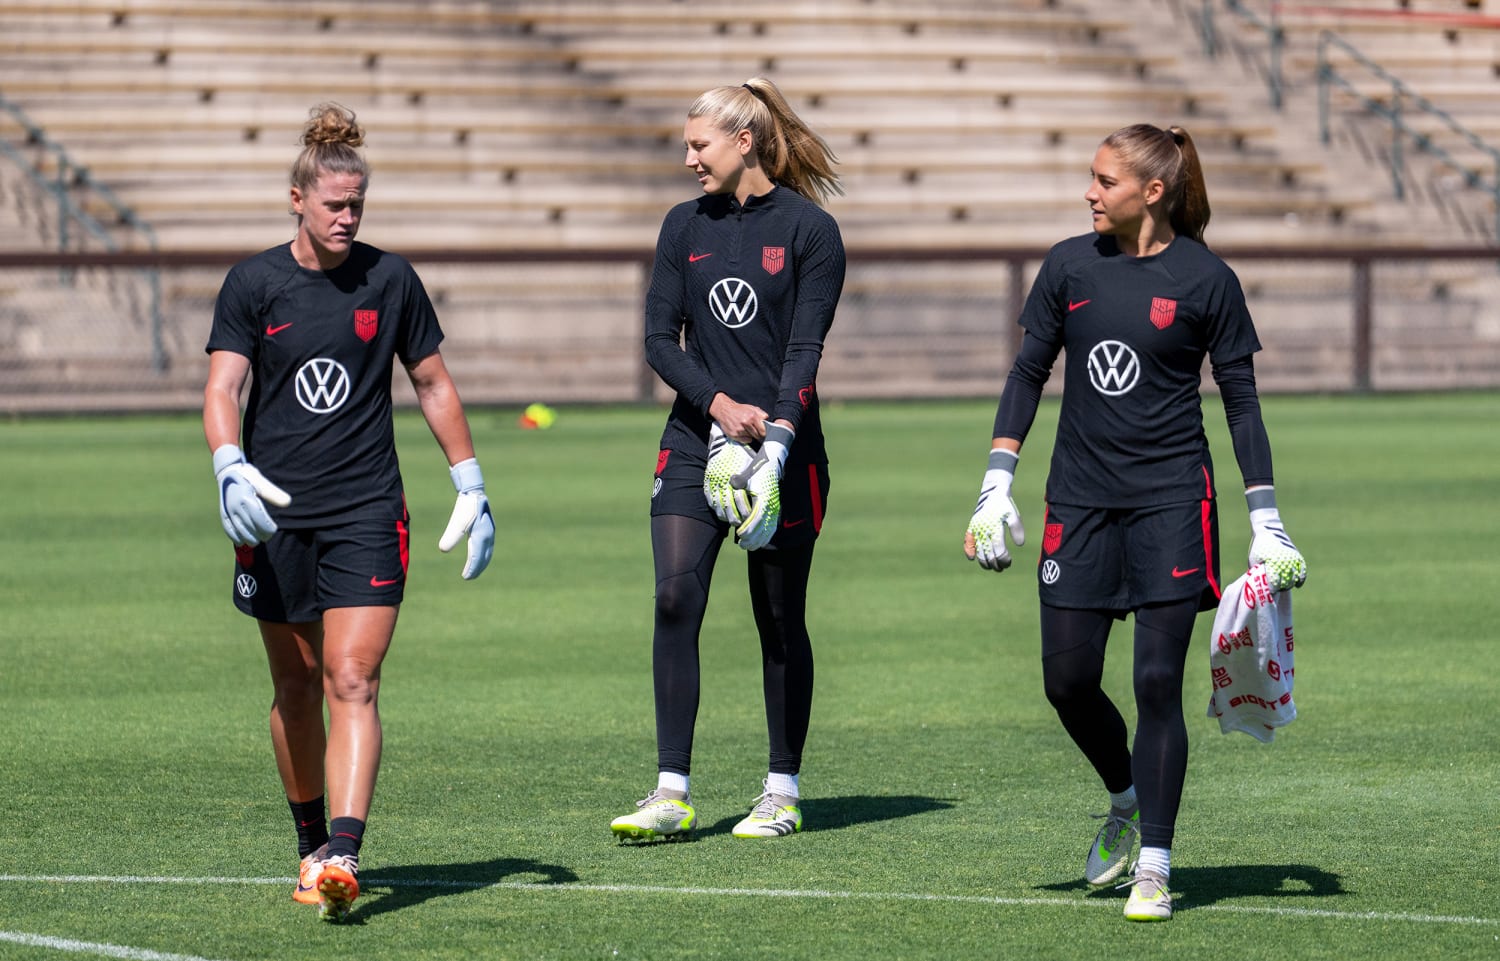 USWNT roster announced for 2023 FIFA Women's World Cup - SoccerWire